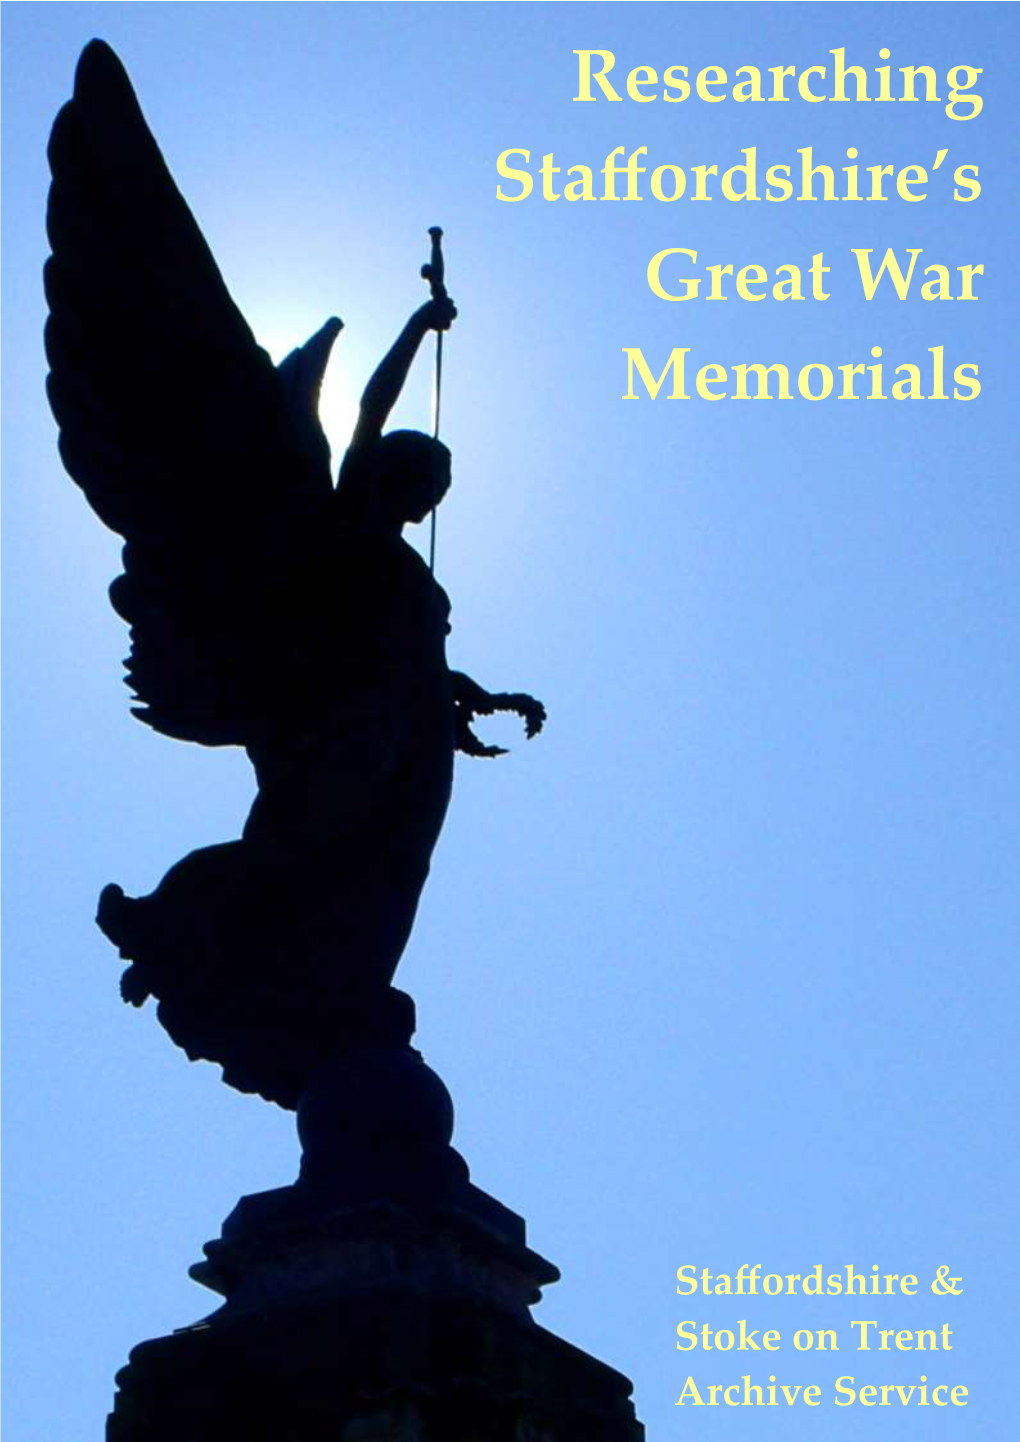 Researching Staffordshire's Great War Memorials